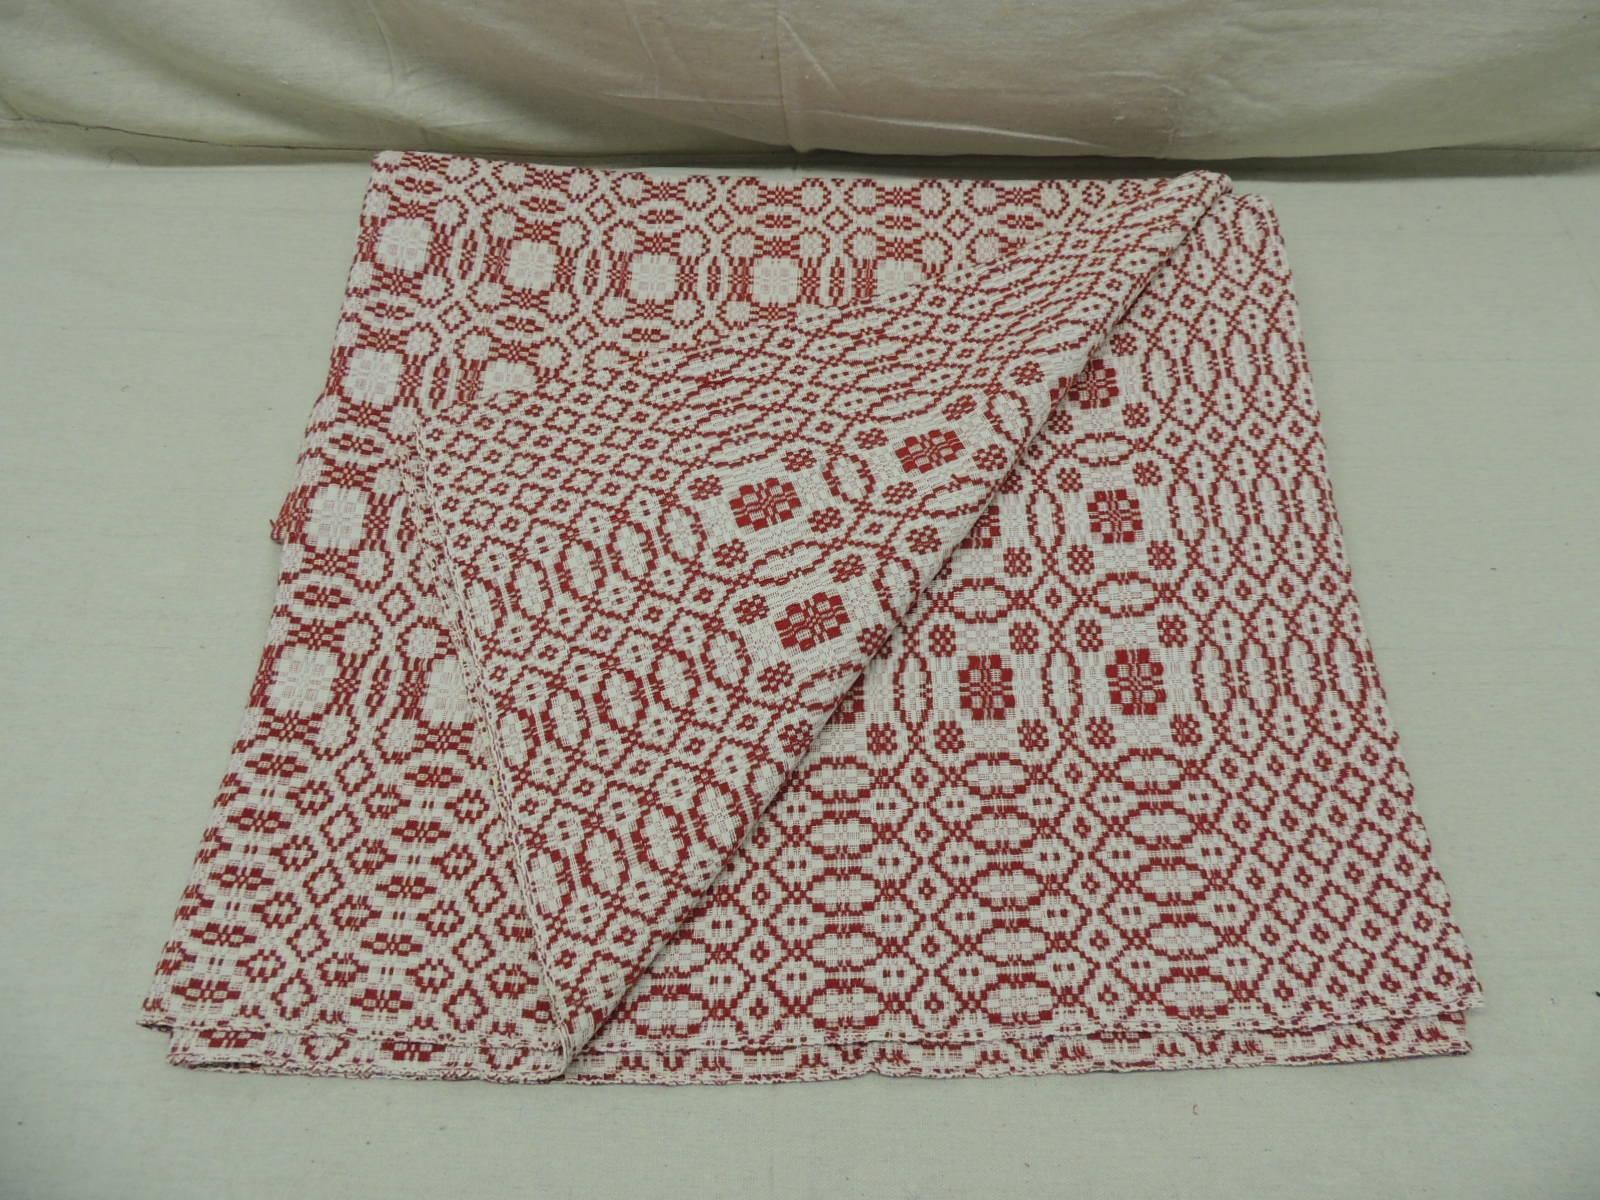 Red and White Americana Jacquard woven blanket/coverlet.
Size: 76